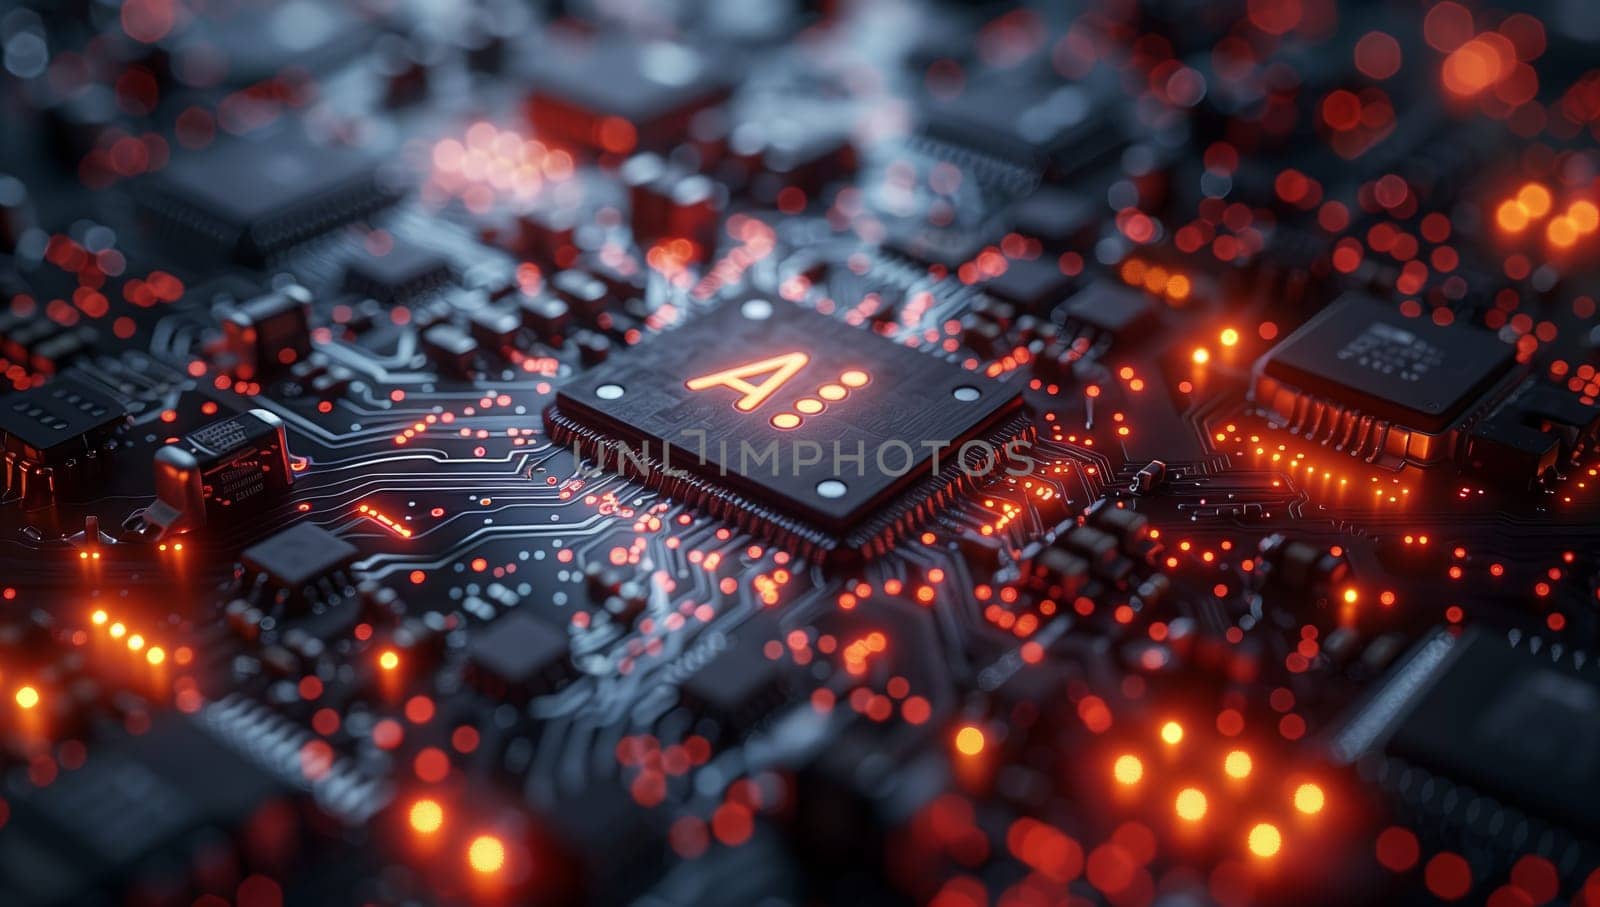 A closeup shot capturing the intricate details of a computer chip on a motherboard, showcasing the electronic engineering and circuit components in electric blue against a dark background